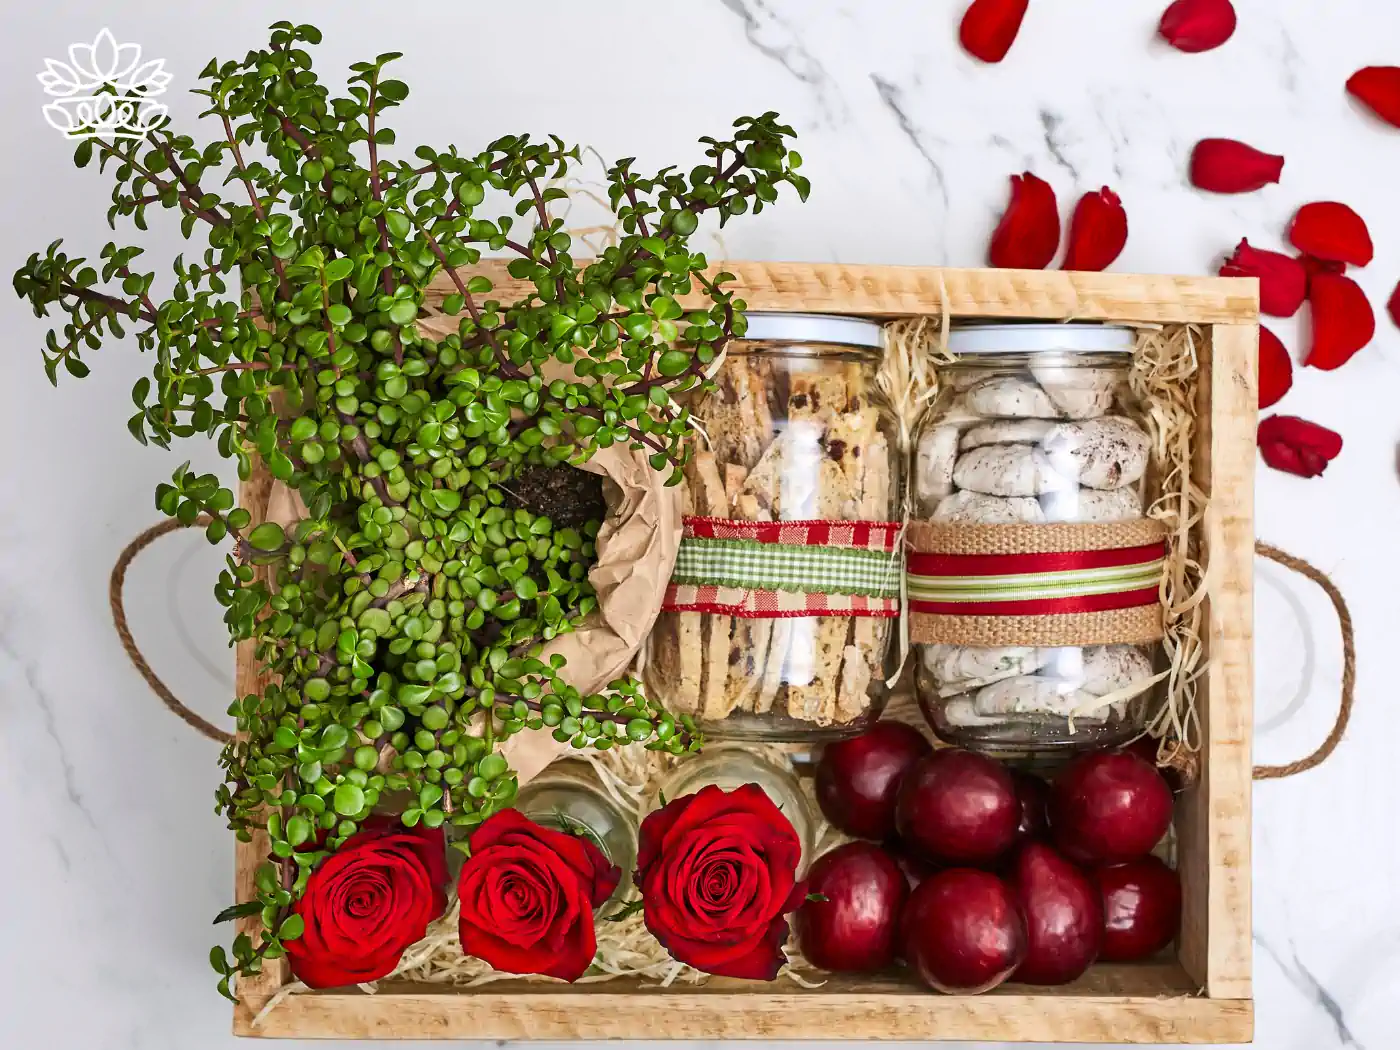 Exquisite get well gift box filled with vibrant red roses, fresh plums, an array of homemade cookies in mason jars, and a lush green potted plant, arranged beautifully in a wooden crate. Delivered with Heart. Fabulous Flowers and Gifts.